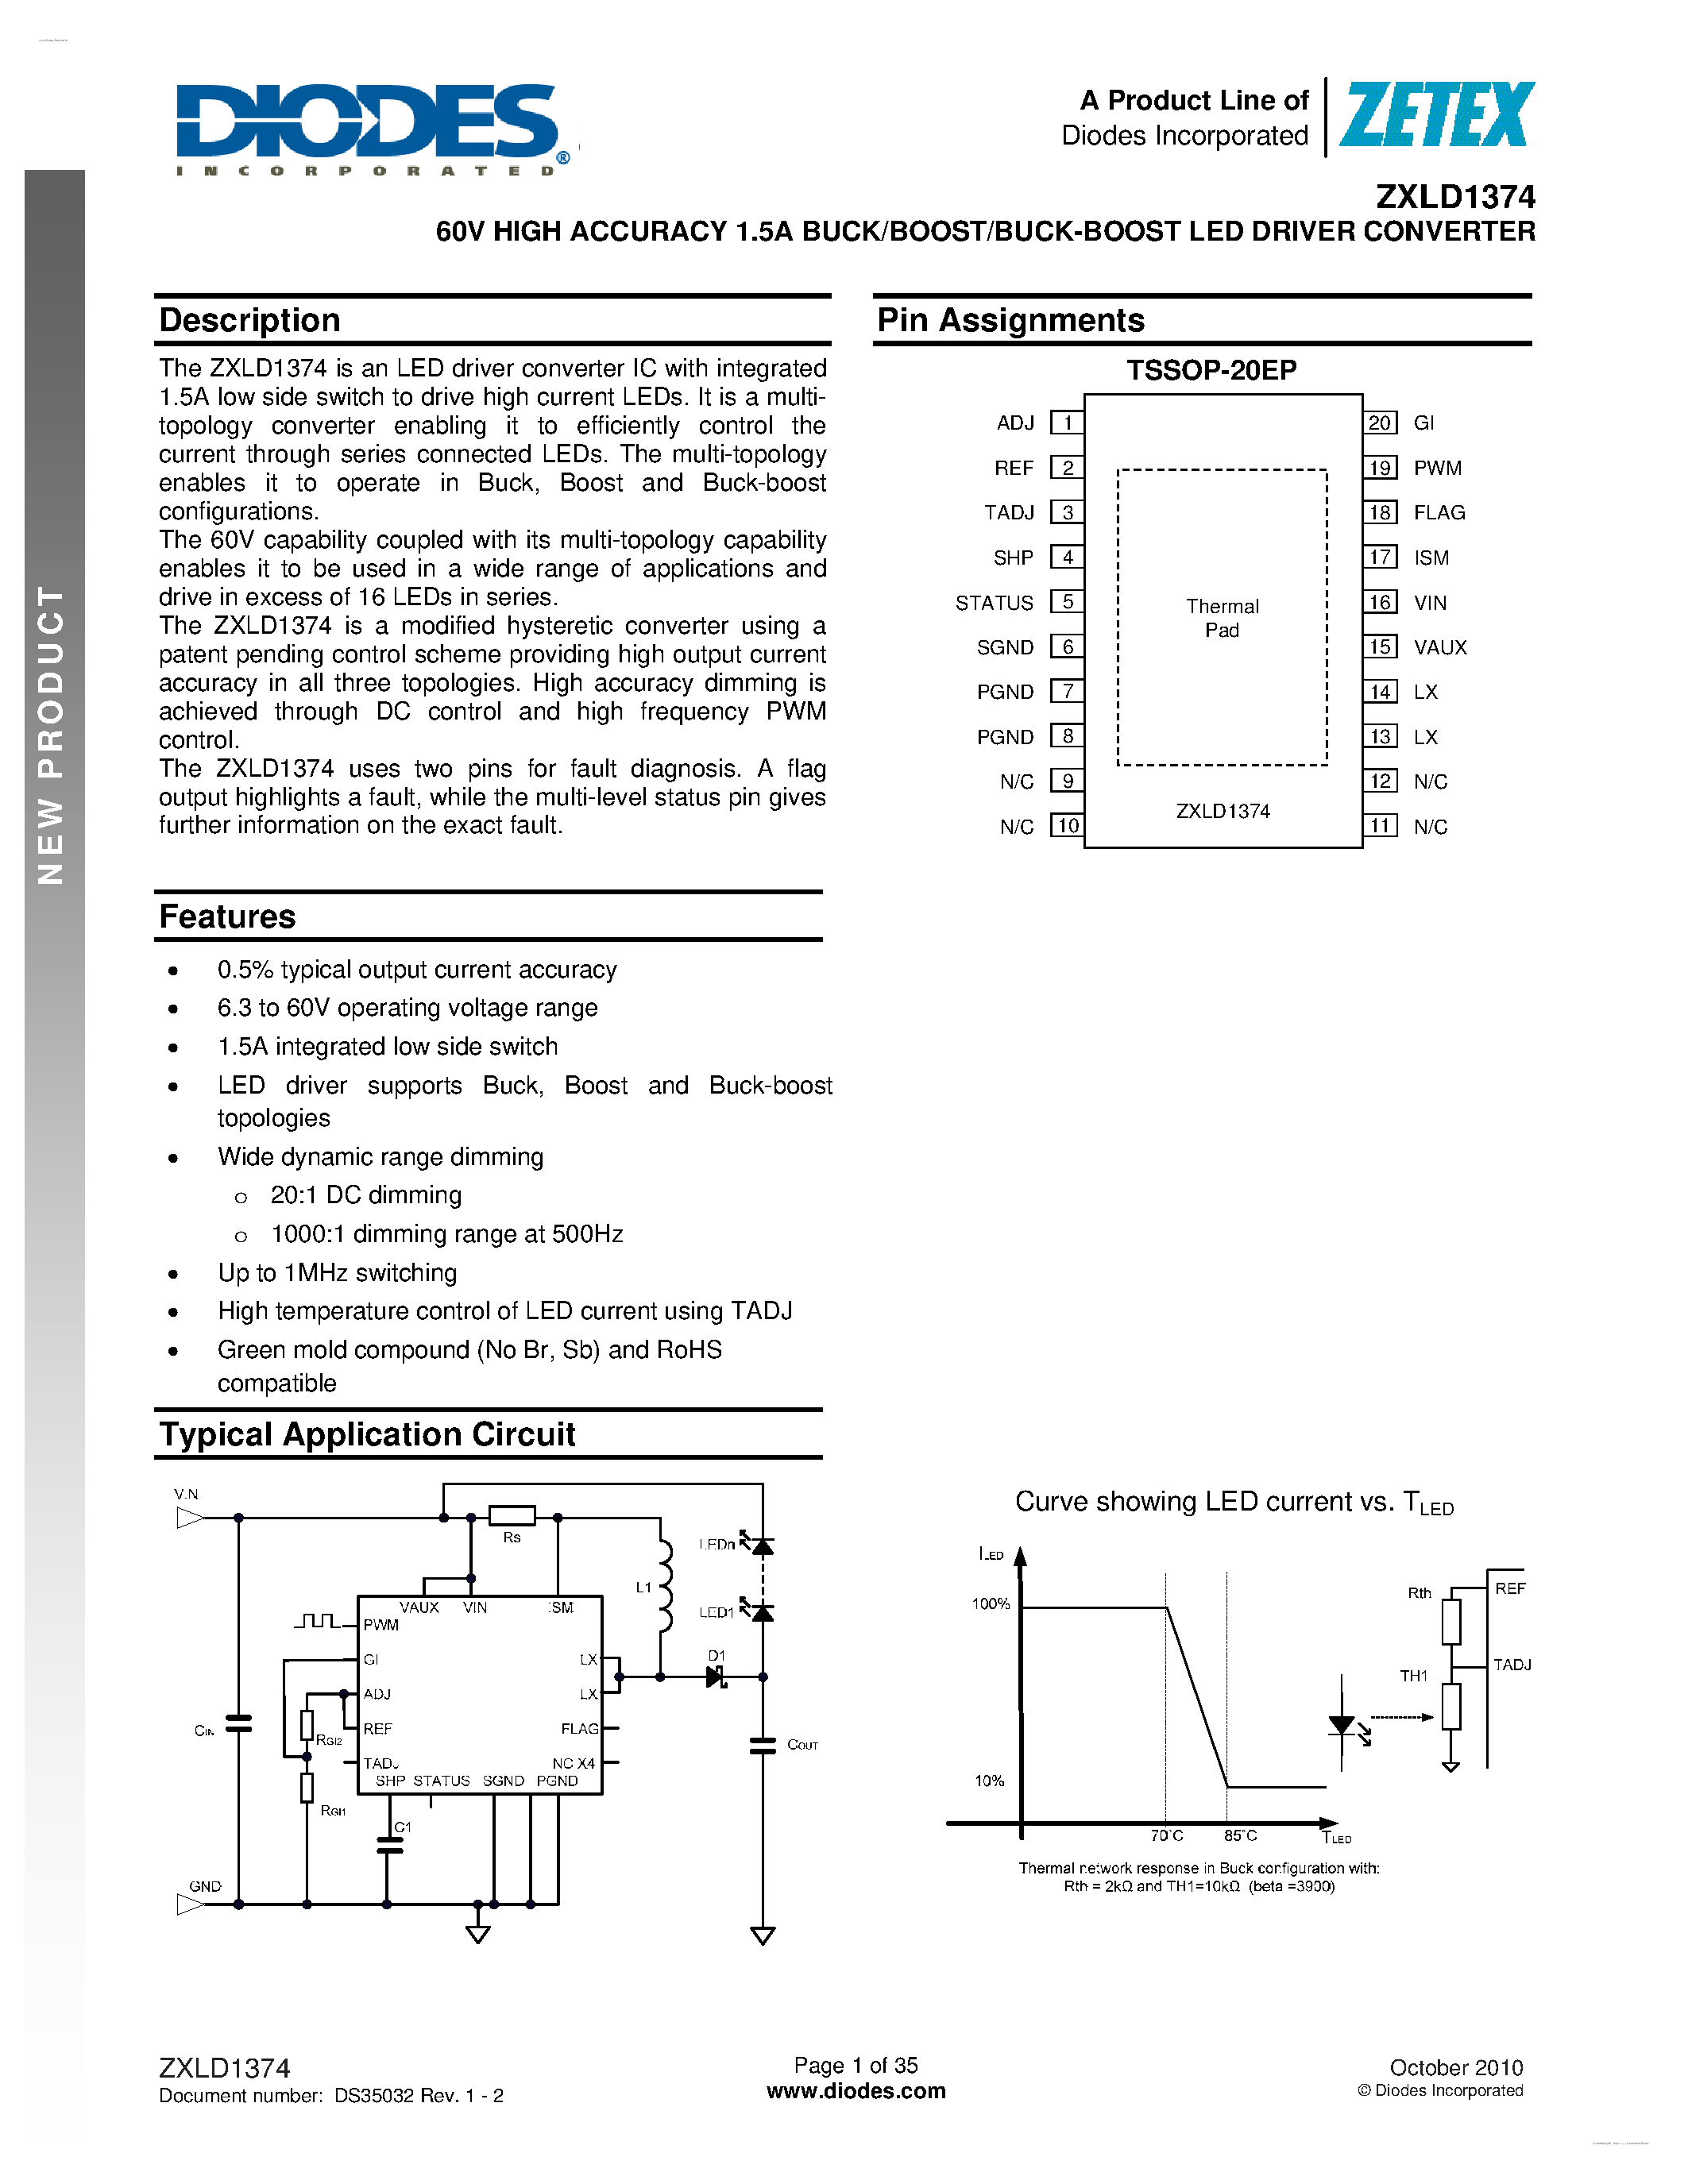 Datasheet ZXLD1374 - 60V HIGH ACCURACY 1.5A BUCK/BOOST/BUCK-BOOST LED DRIVER CONVERTER page 1